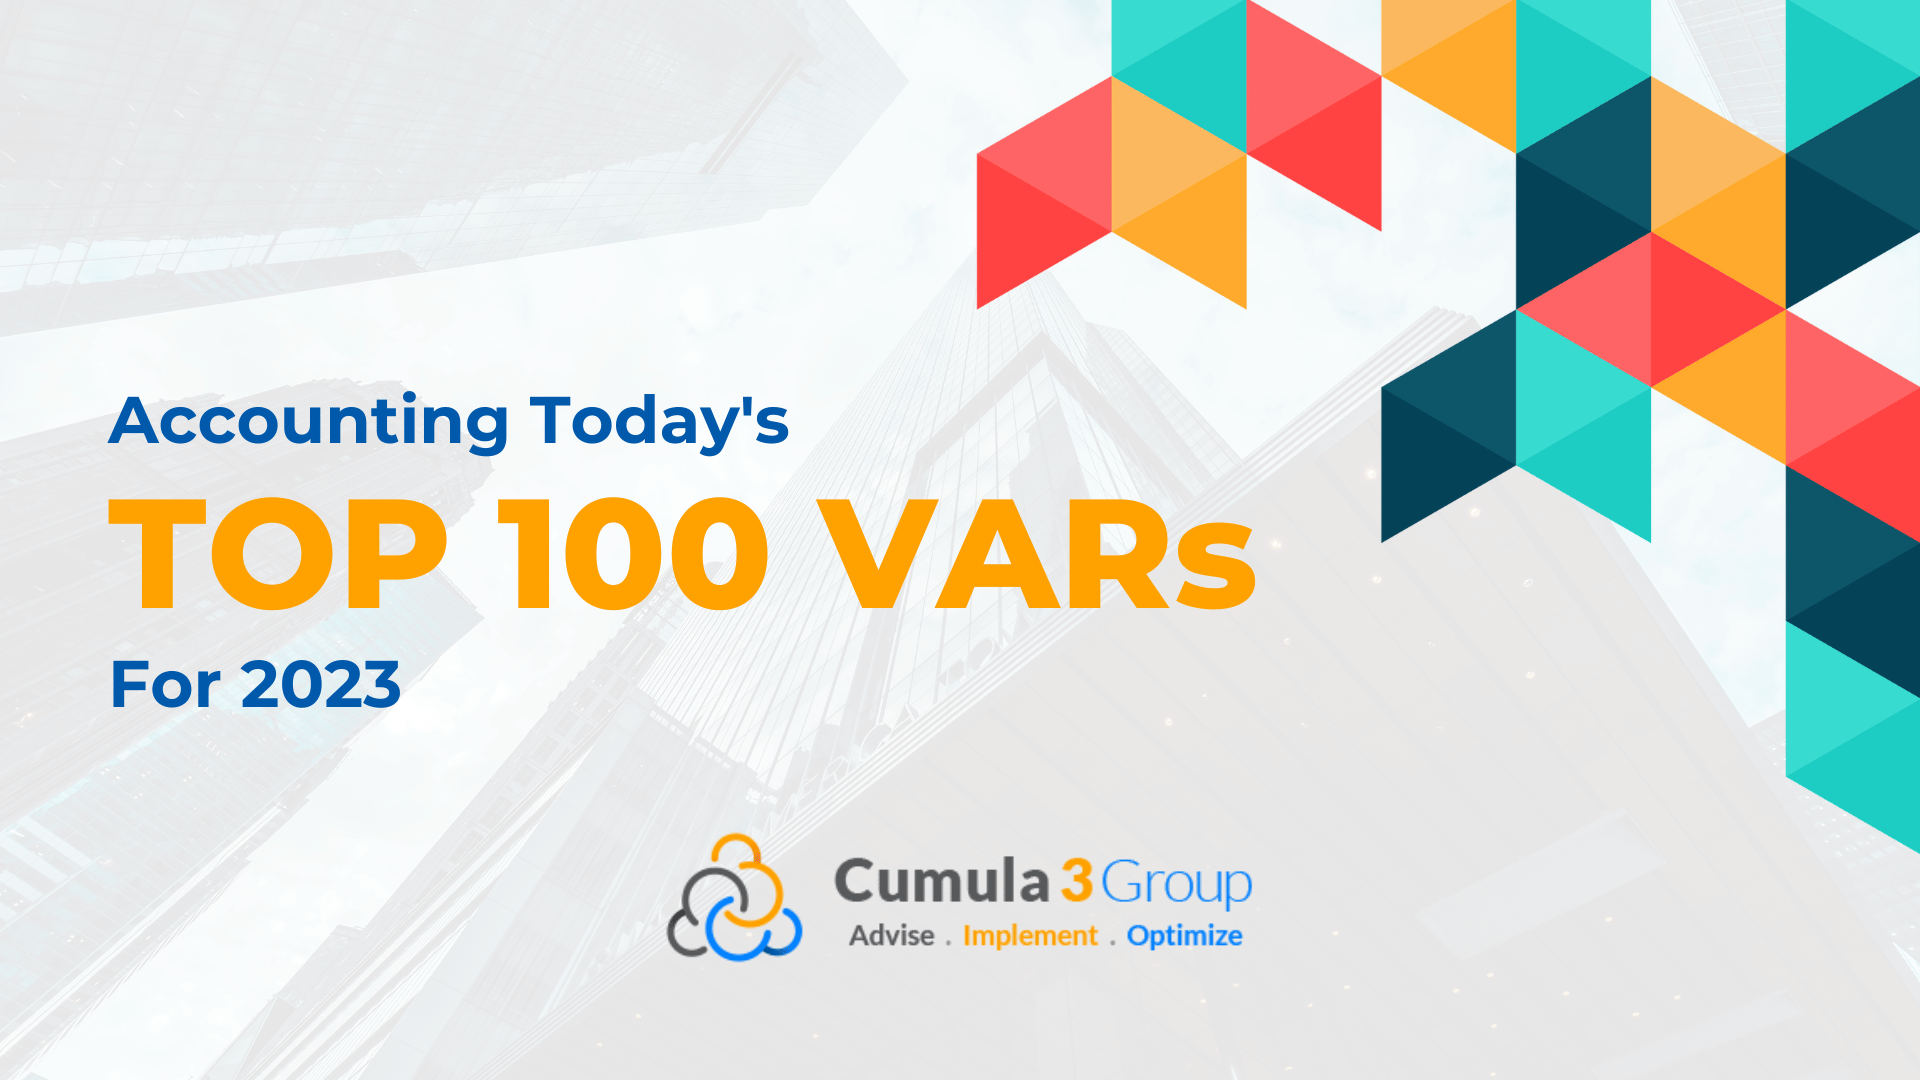 Cumula 3 Group Celebrates Inclusion in Accounting Today's VAR 100 List for 2023